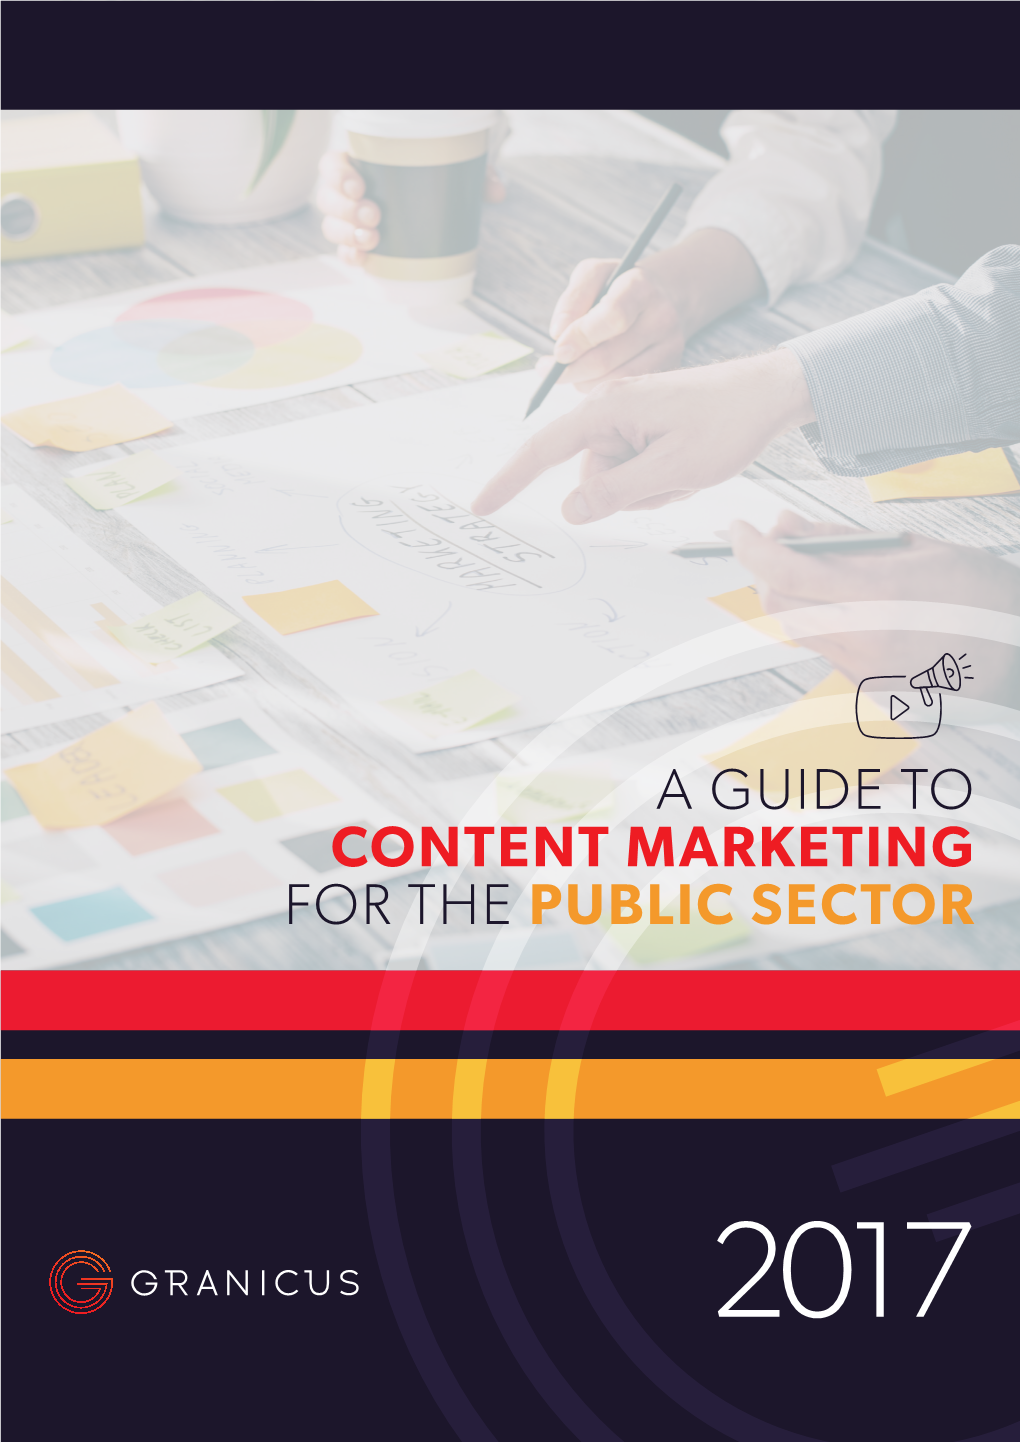 A Guide to Content Marketing for the Public Sector